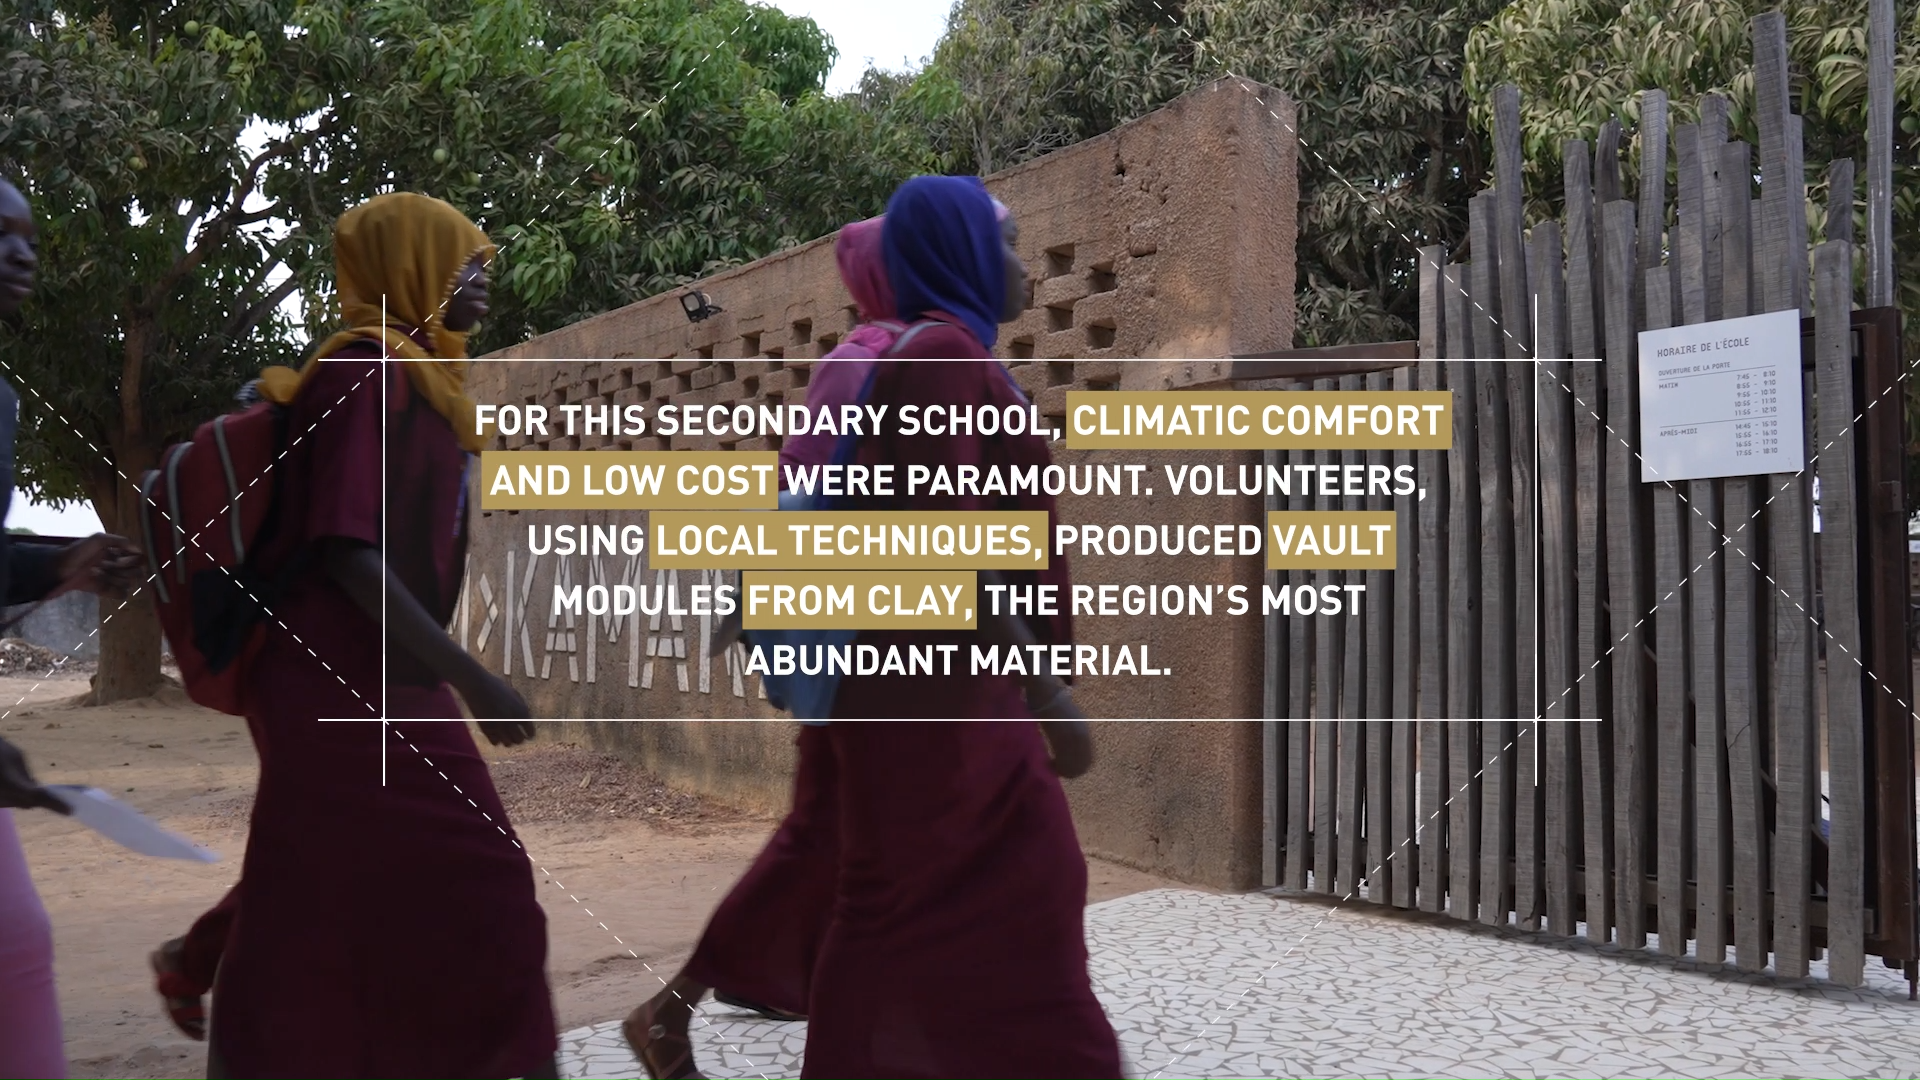 Kamanar Secondary School - <p>CEM Kamanar Secondary School,&nbsp;Ziguinchor, Senegal, by Dawoffice: For this secondary school, volunteers, using local techniques, produced vault modules from clay which (with lattices) act as evaporating coolers.</p>